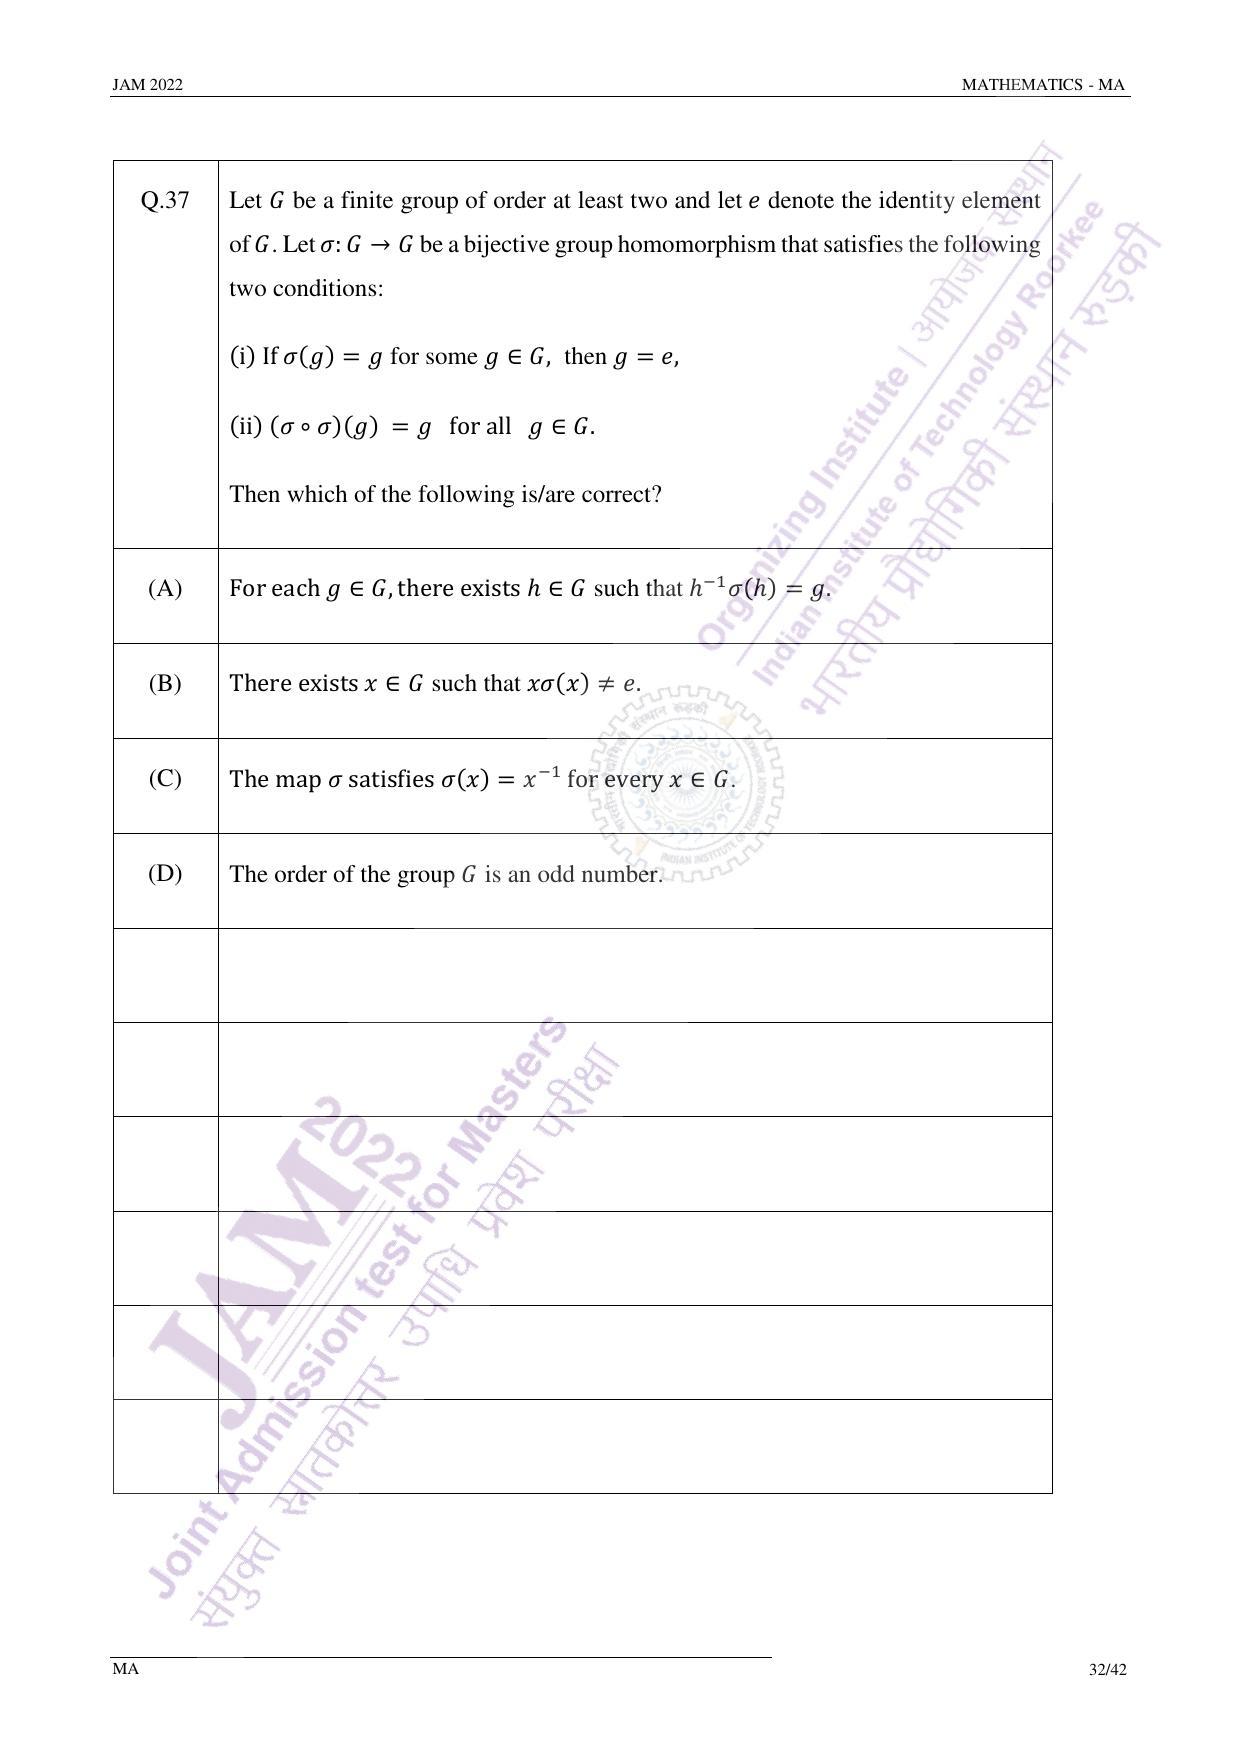 JAM 2022: MA Question Paper - Page 32